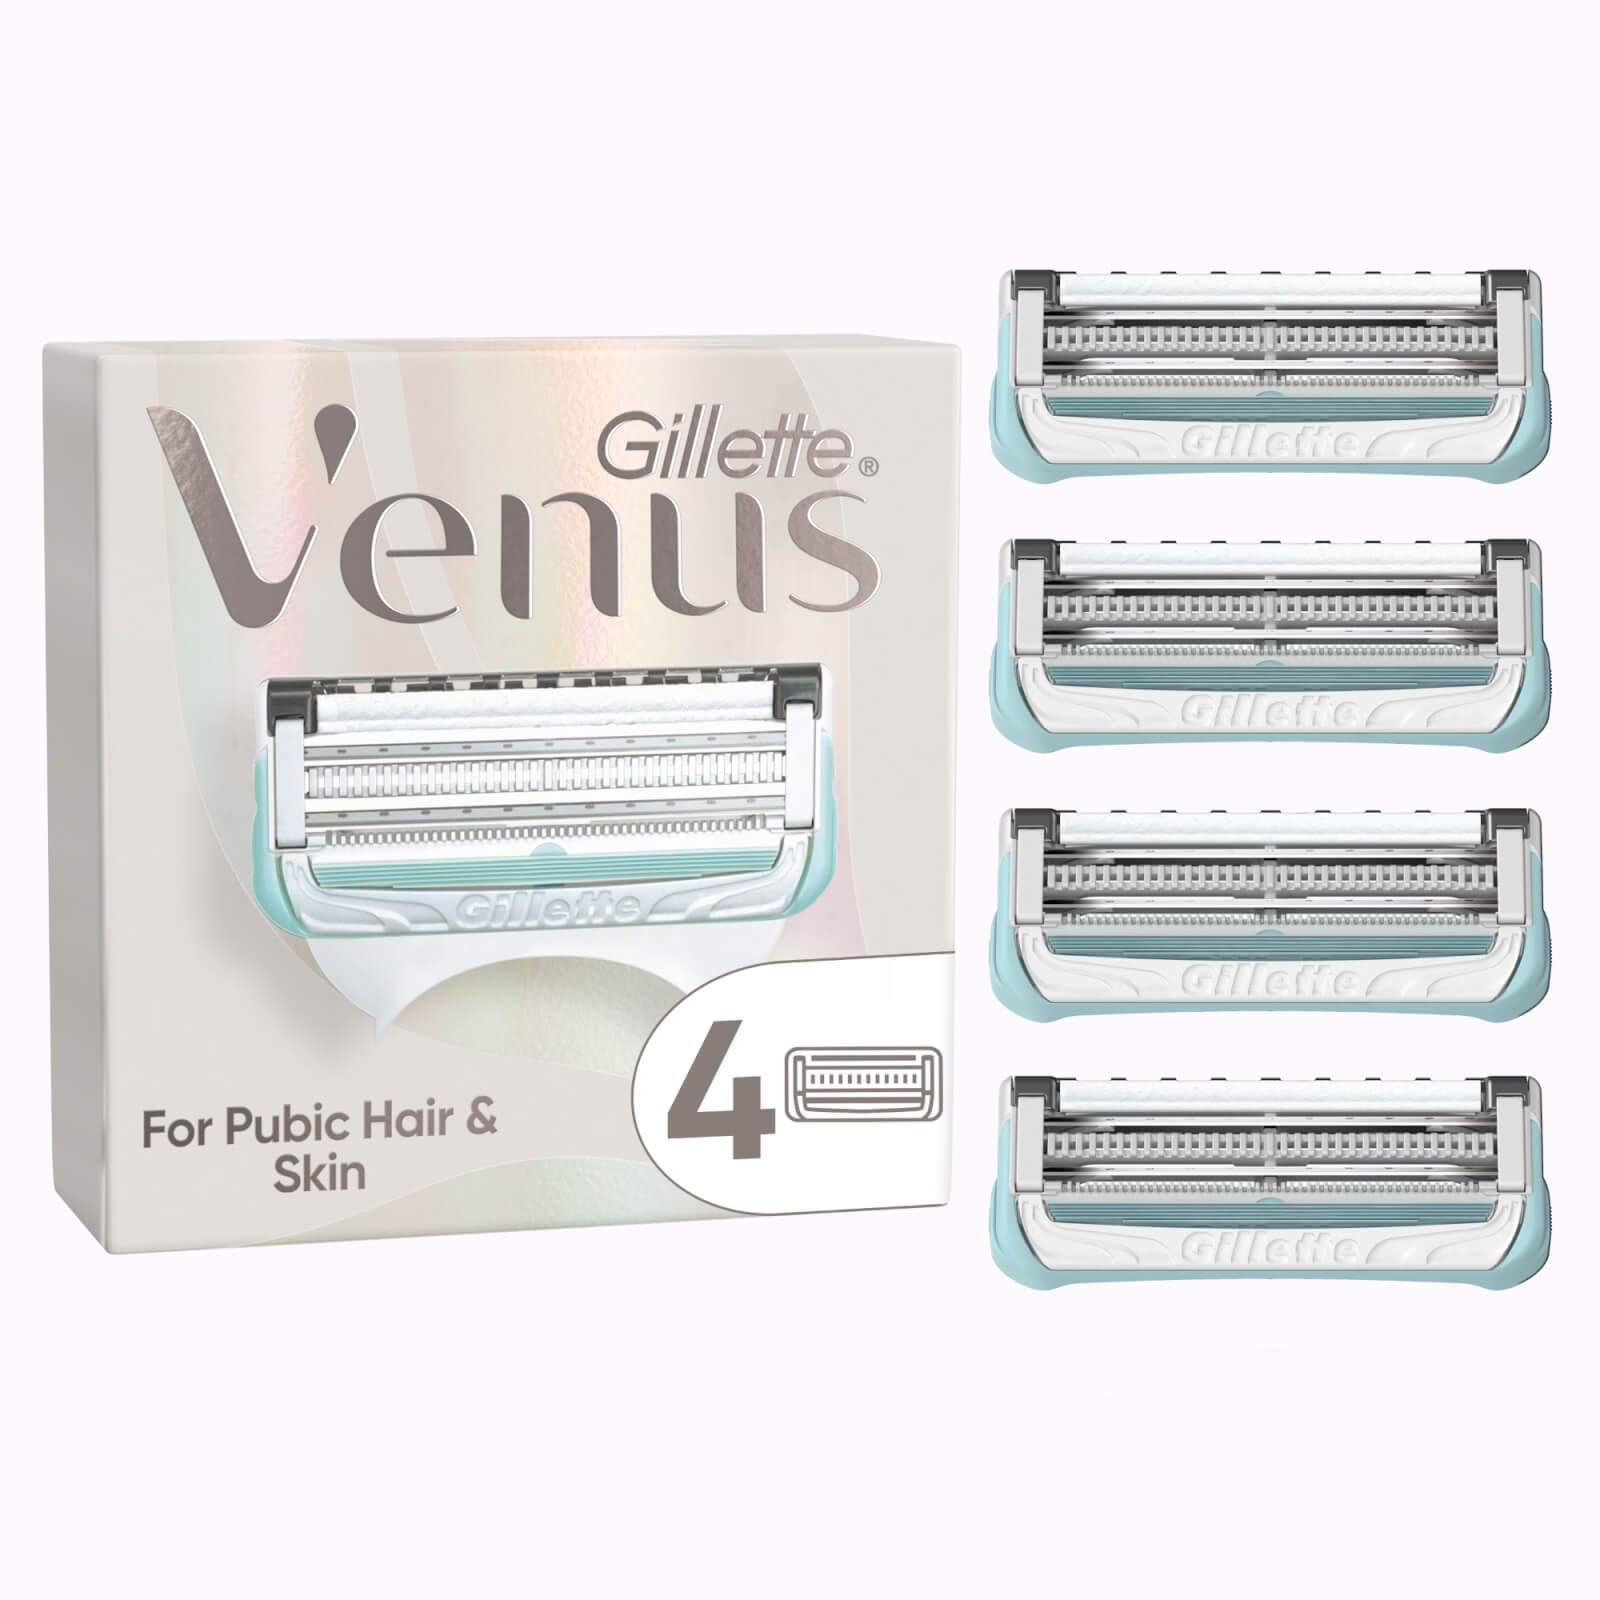 Venus Satin Care Razor Blades for Pubic Hair and Skin - 4 Pack